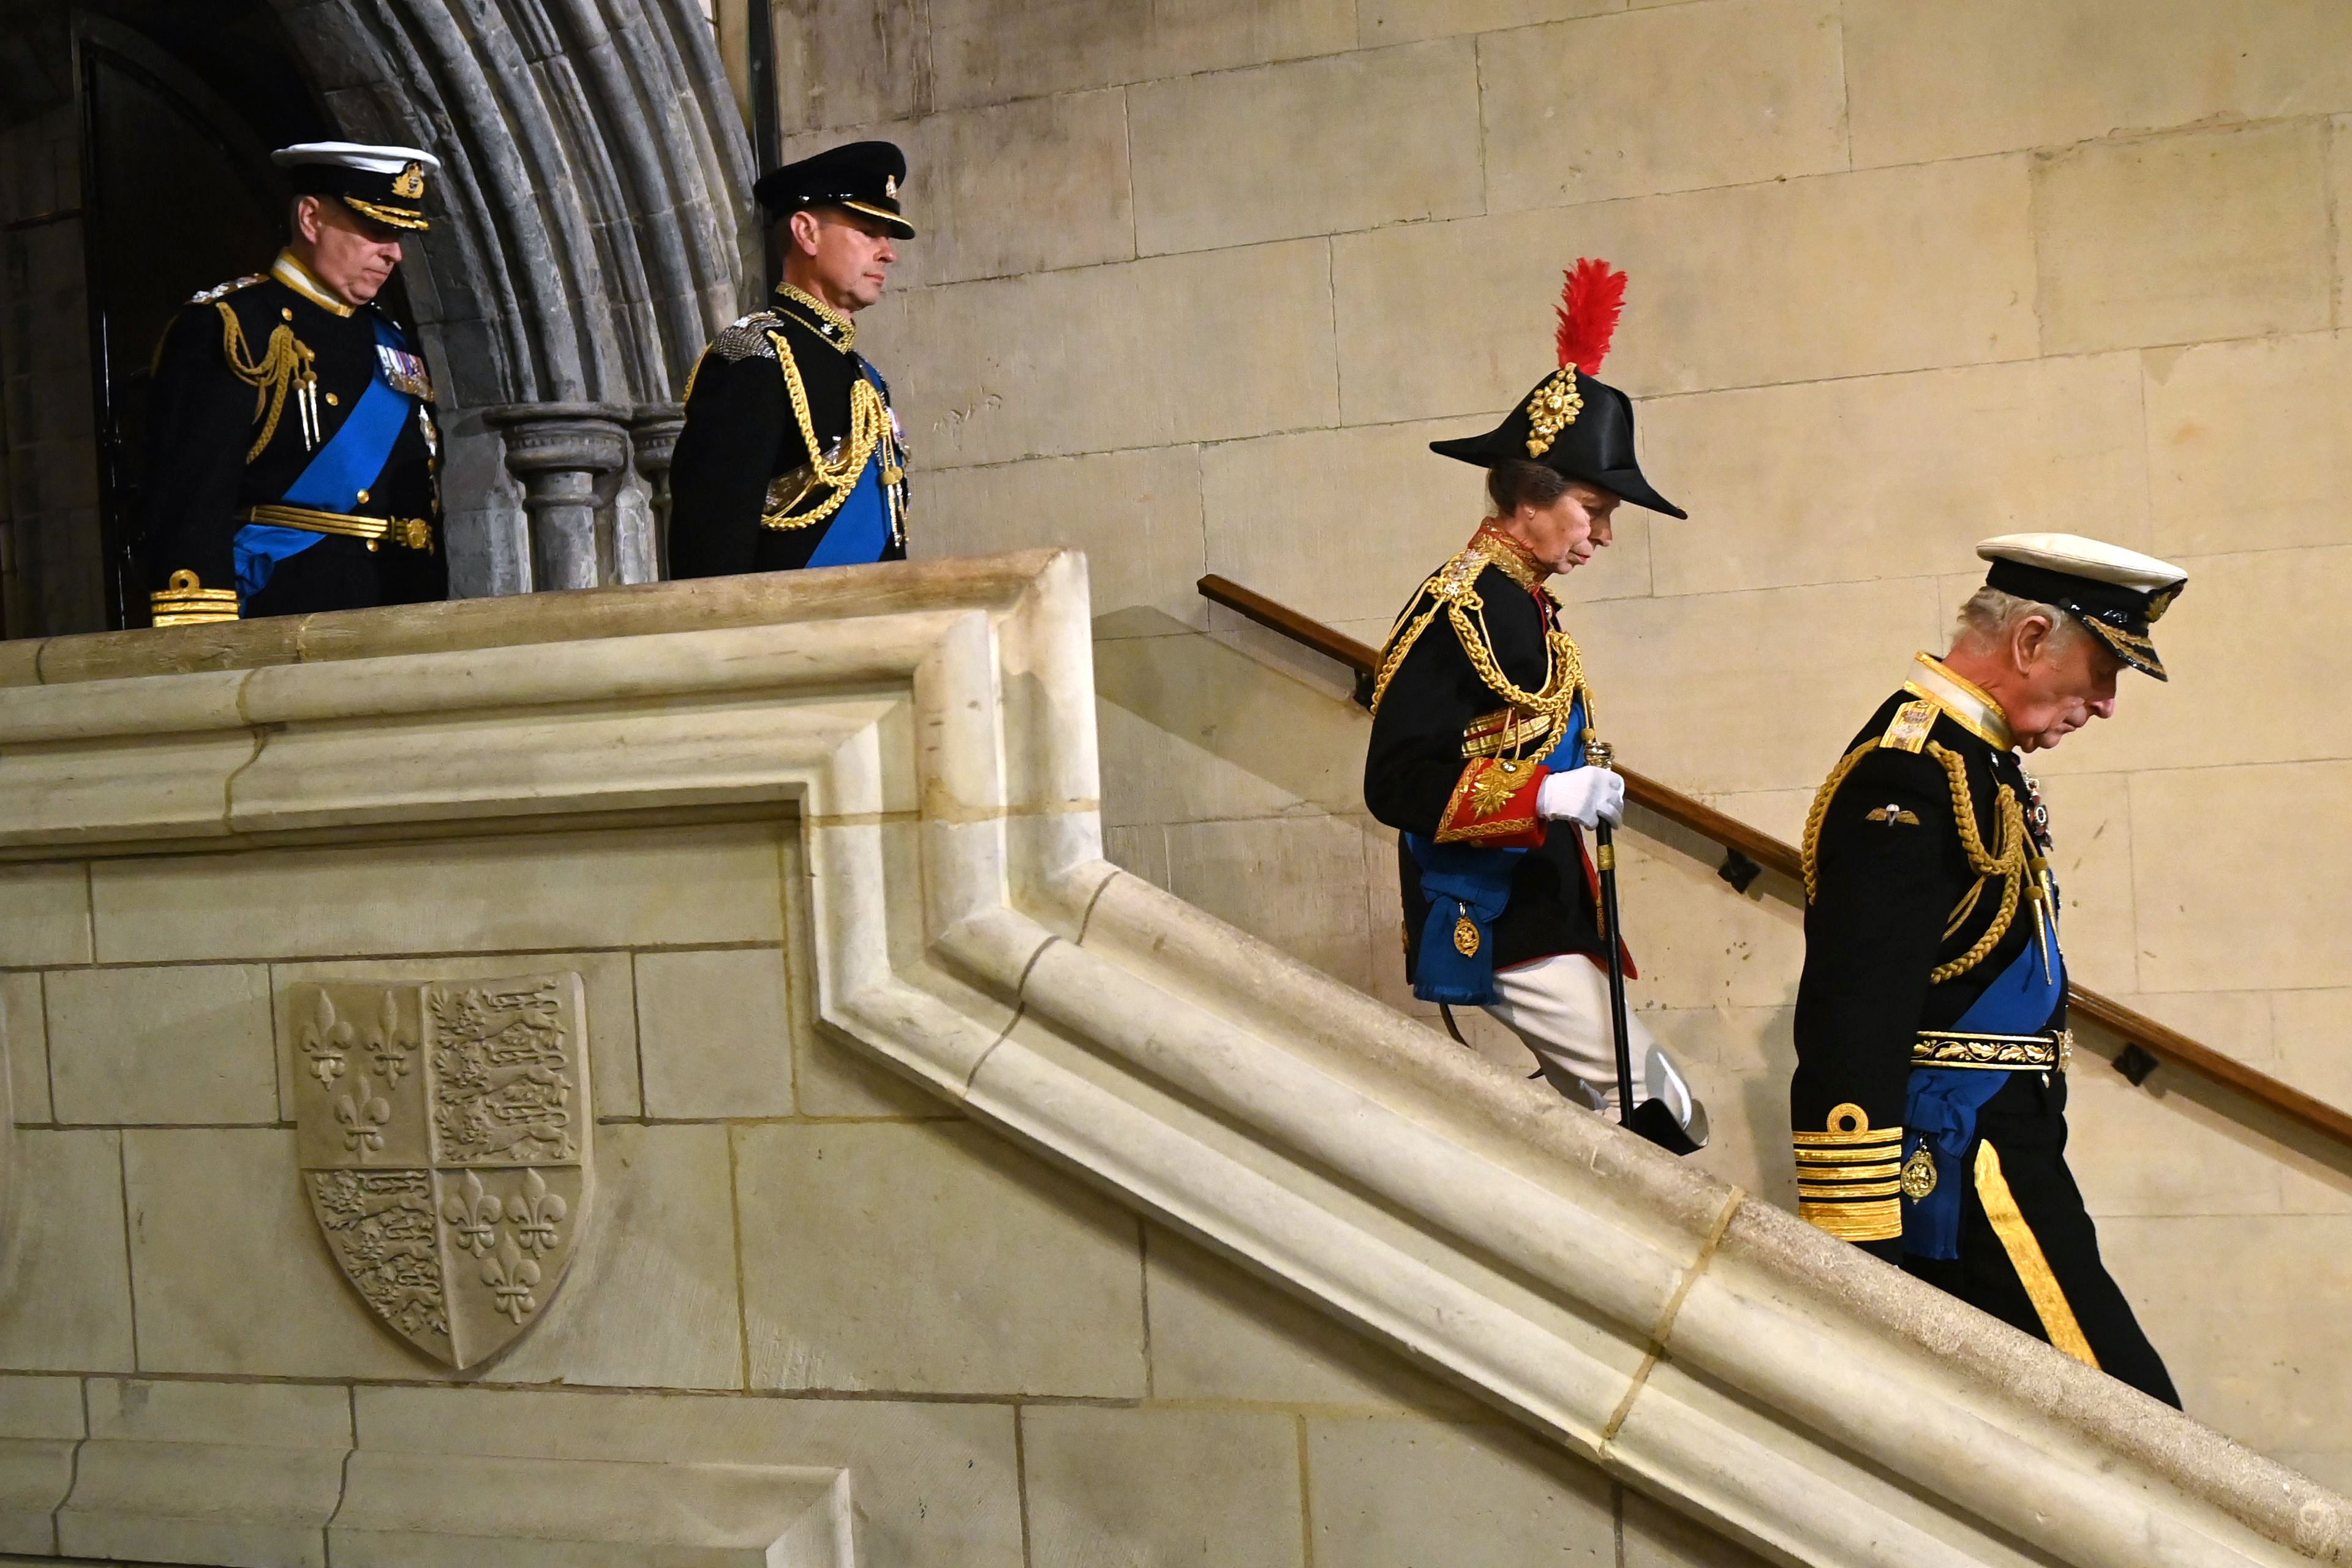 <p>King Charles III, Princess Anne, Prince Edward and Prince Andrew made their way down a staircase at Westminster Hall at the Palace of Westminster in London on Sept. 16, 2022, and walked to the catafalque upon which the coffin of their mother, Queen Elizabeth II, rested. They surrounded her body and held vigil for 15 minutes as crowds of mourners filed past during the late monarch's lying-in-state ahead of her Sept. 19 funeral.</p>